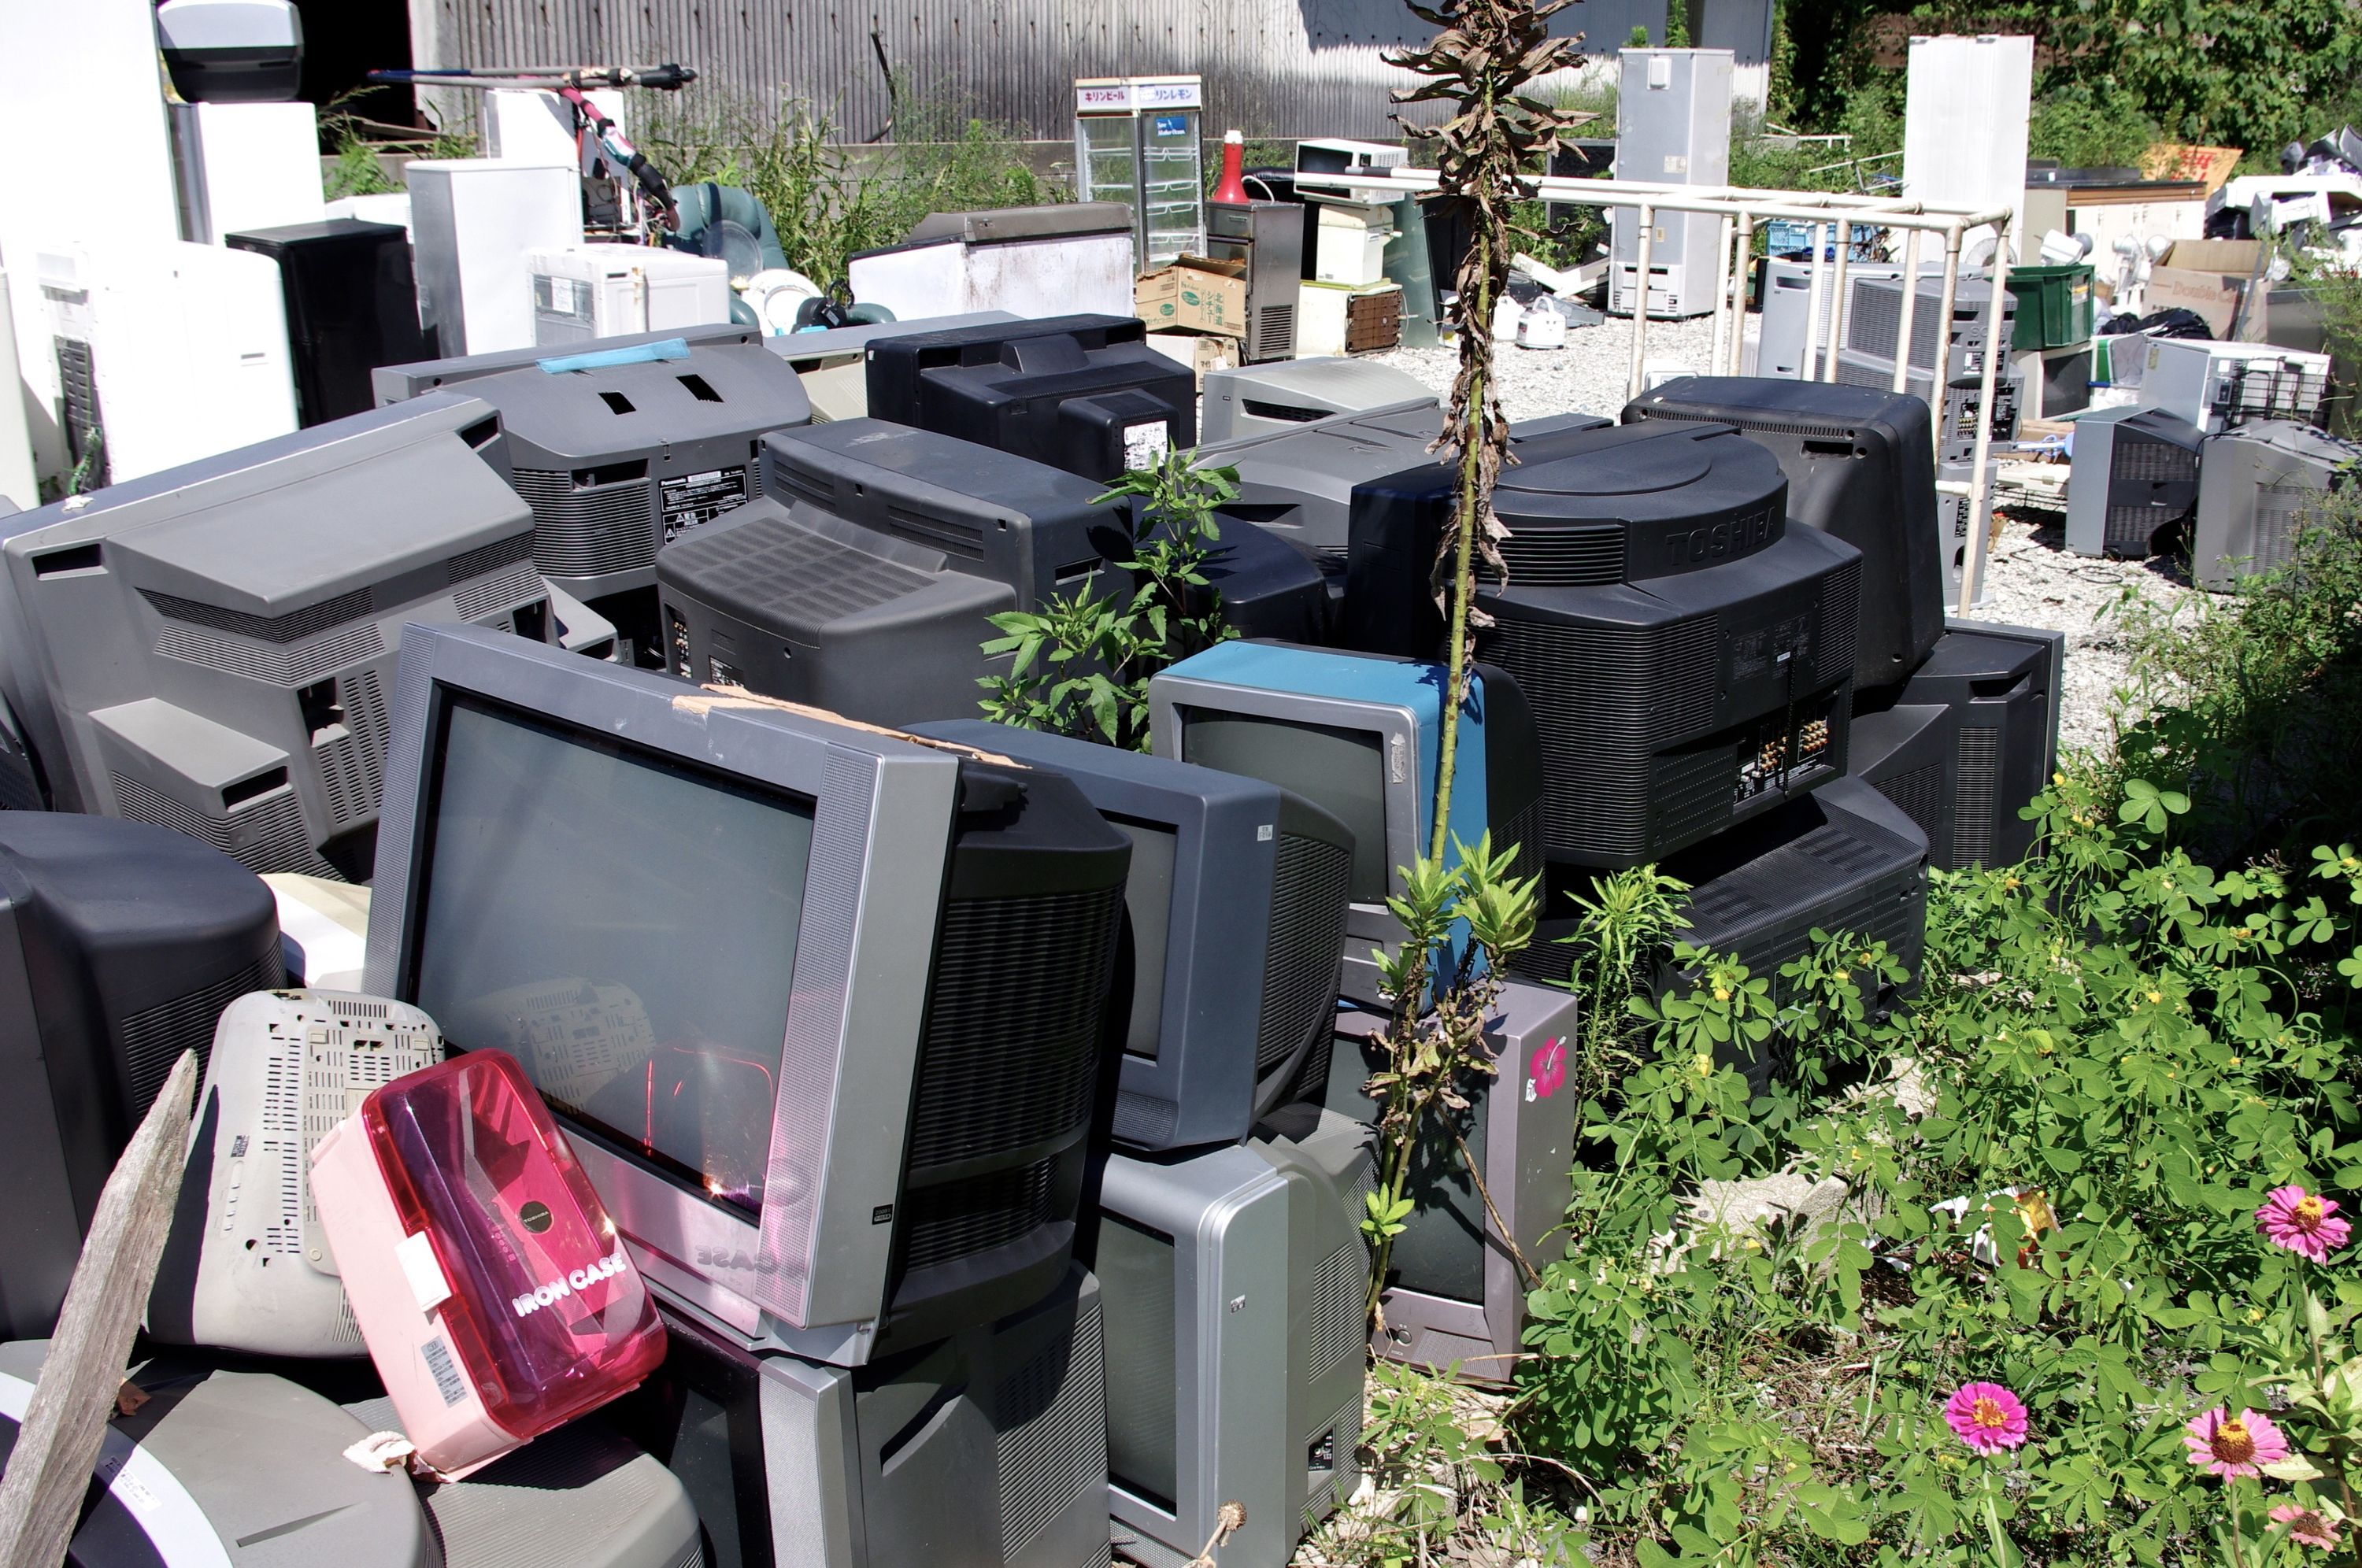 Discarded analog televisions